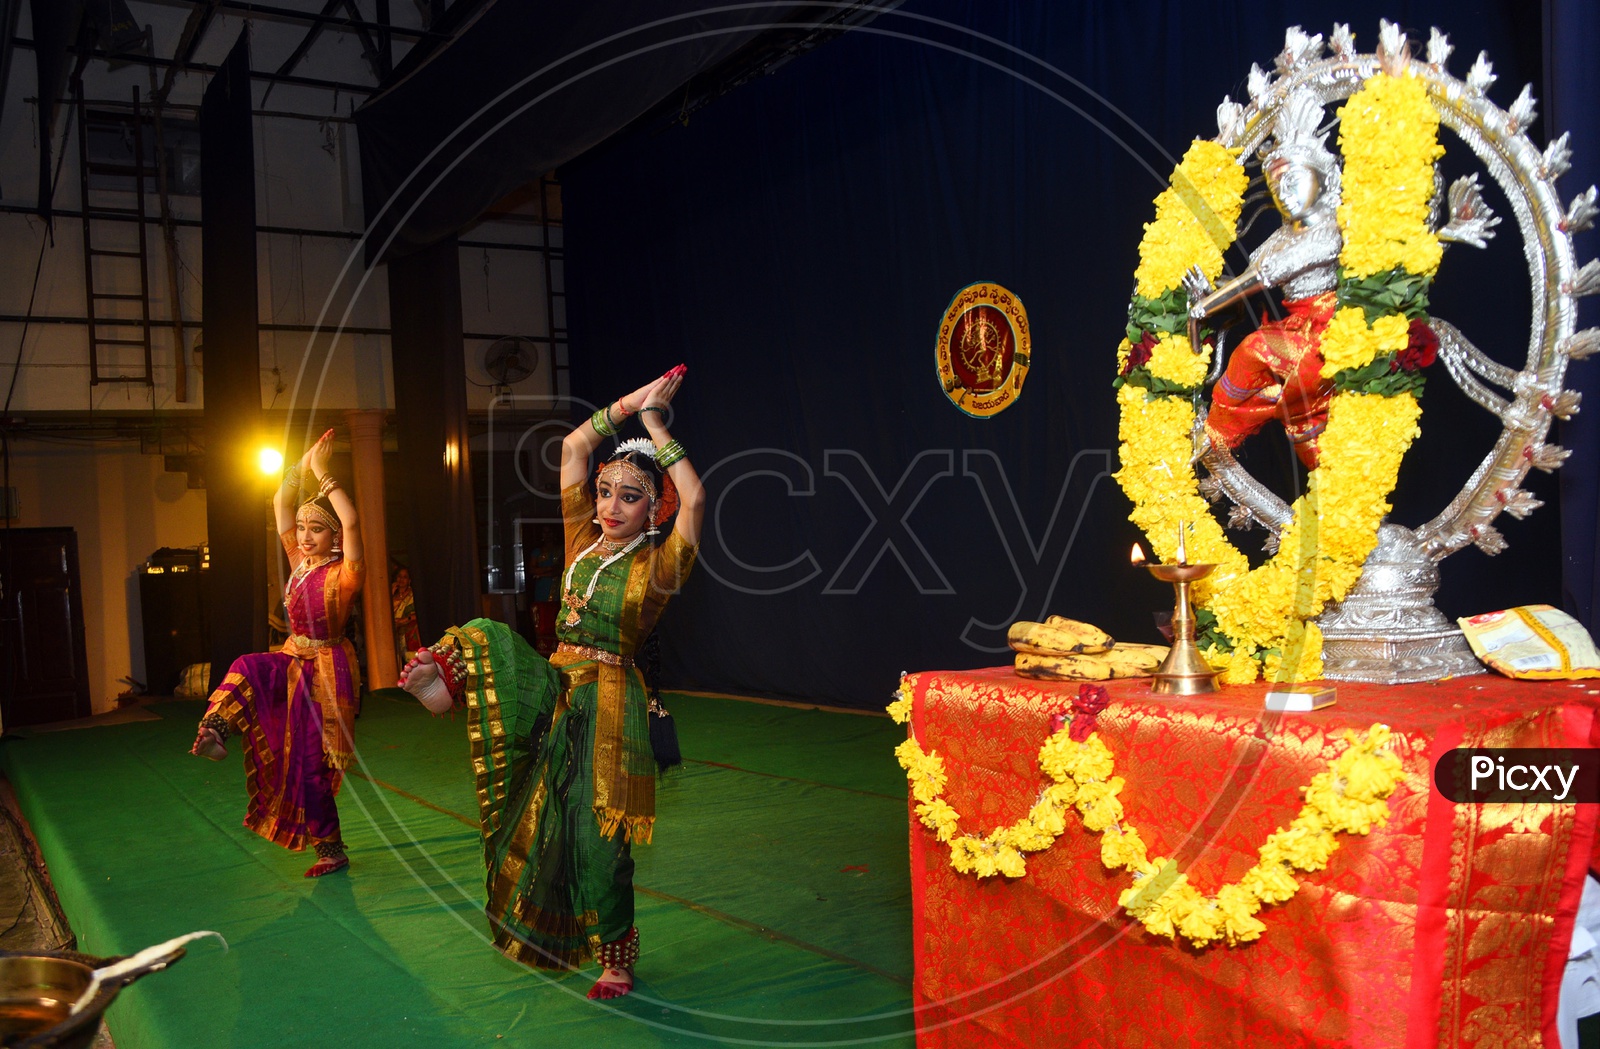 Indian women classical dance performance on the stage with the Nataraja statue